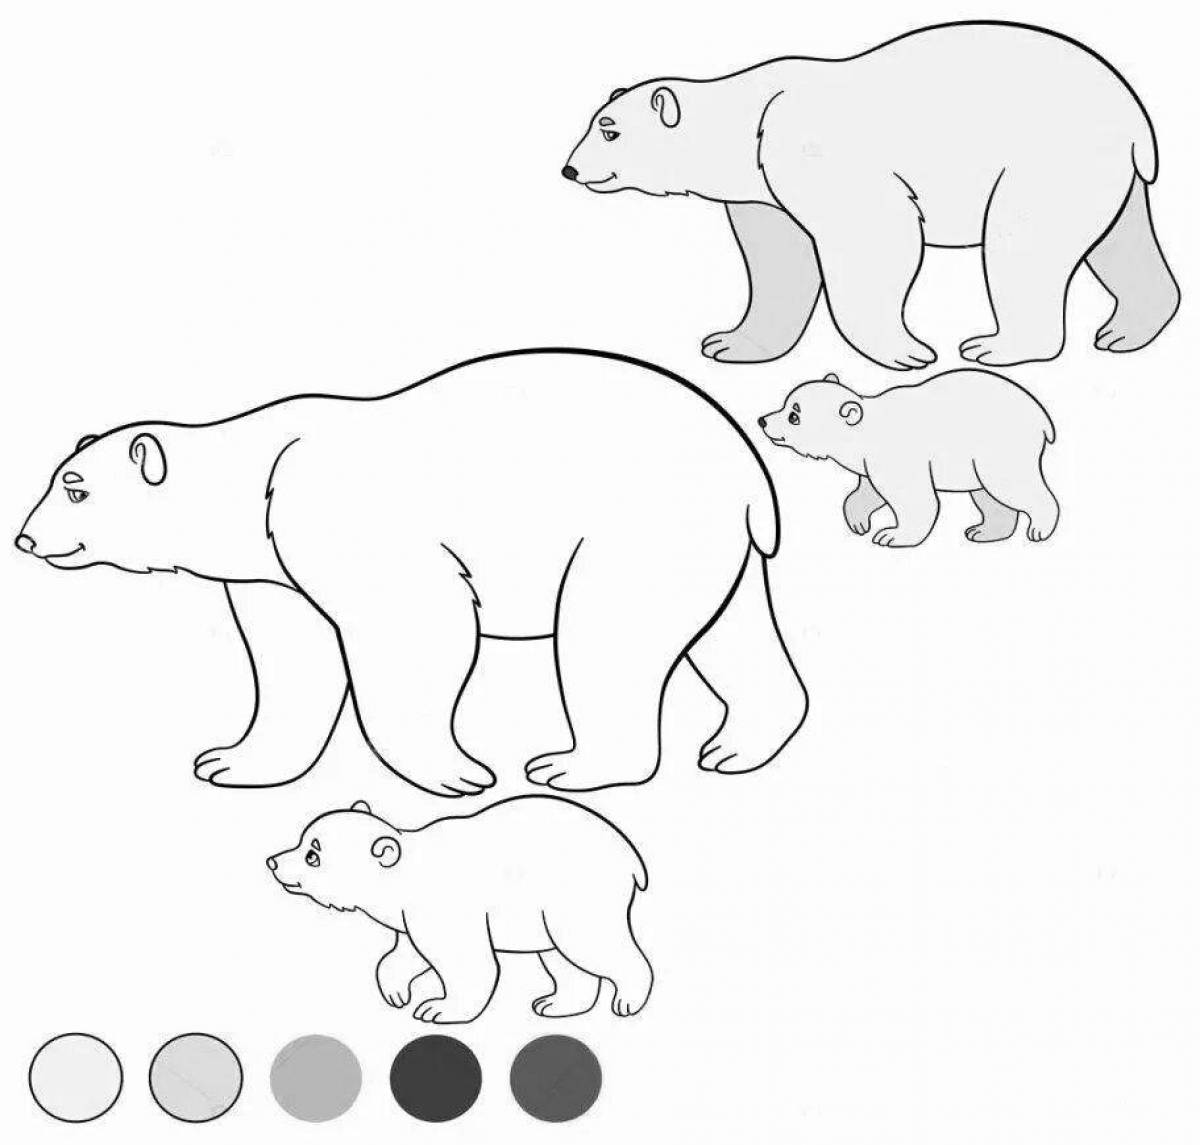 Coloring page adorable teddy bear and teddy bear